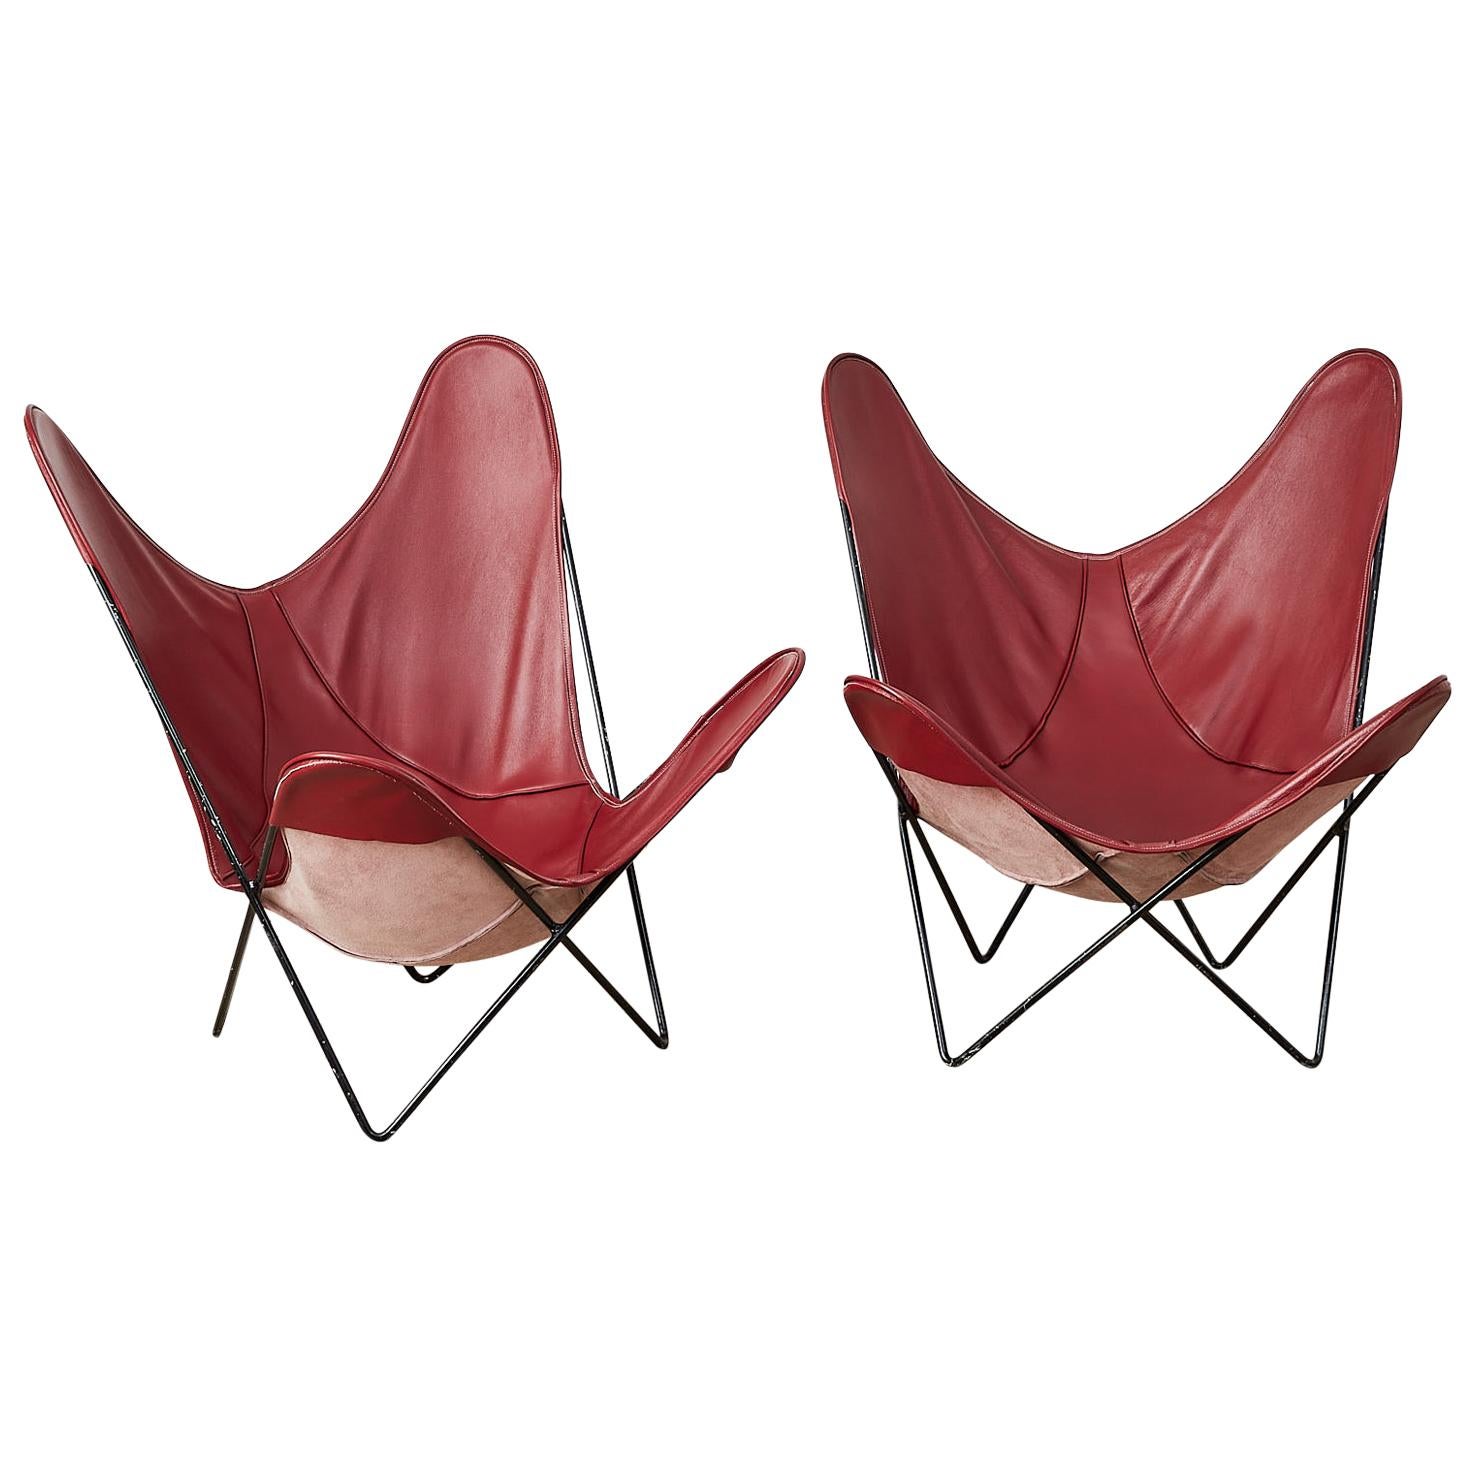 Pair of 1970s Burgundy Leather 'Butterfly' Chairs